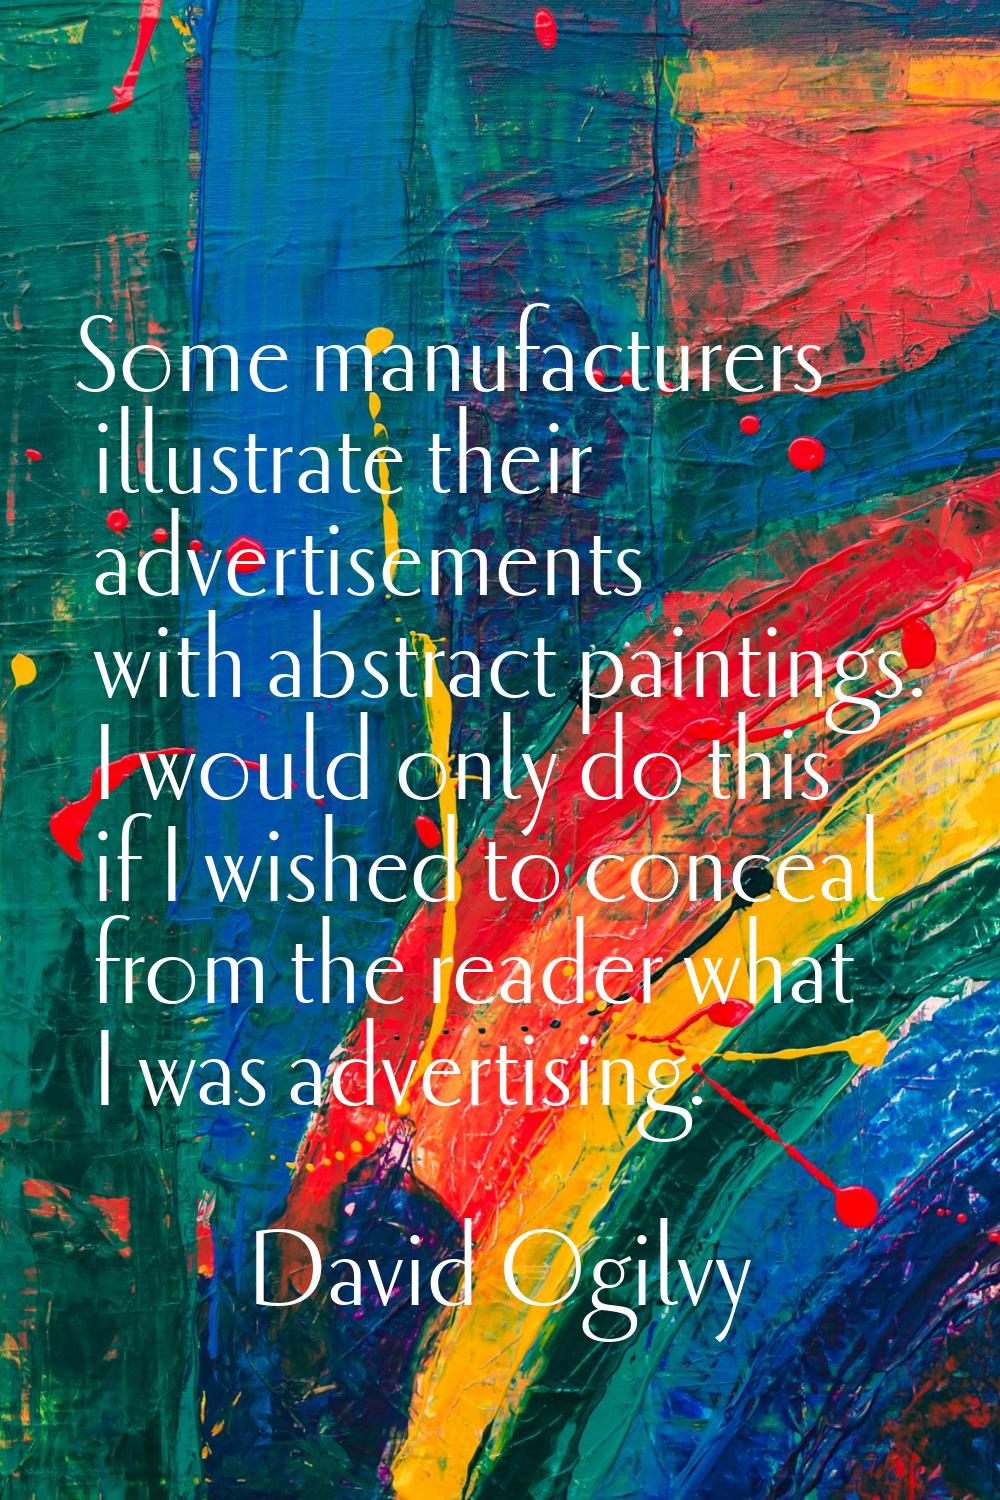 Some manufacturers illustrate their advertisements with abstract paintings. I would only do this if